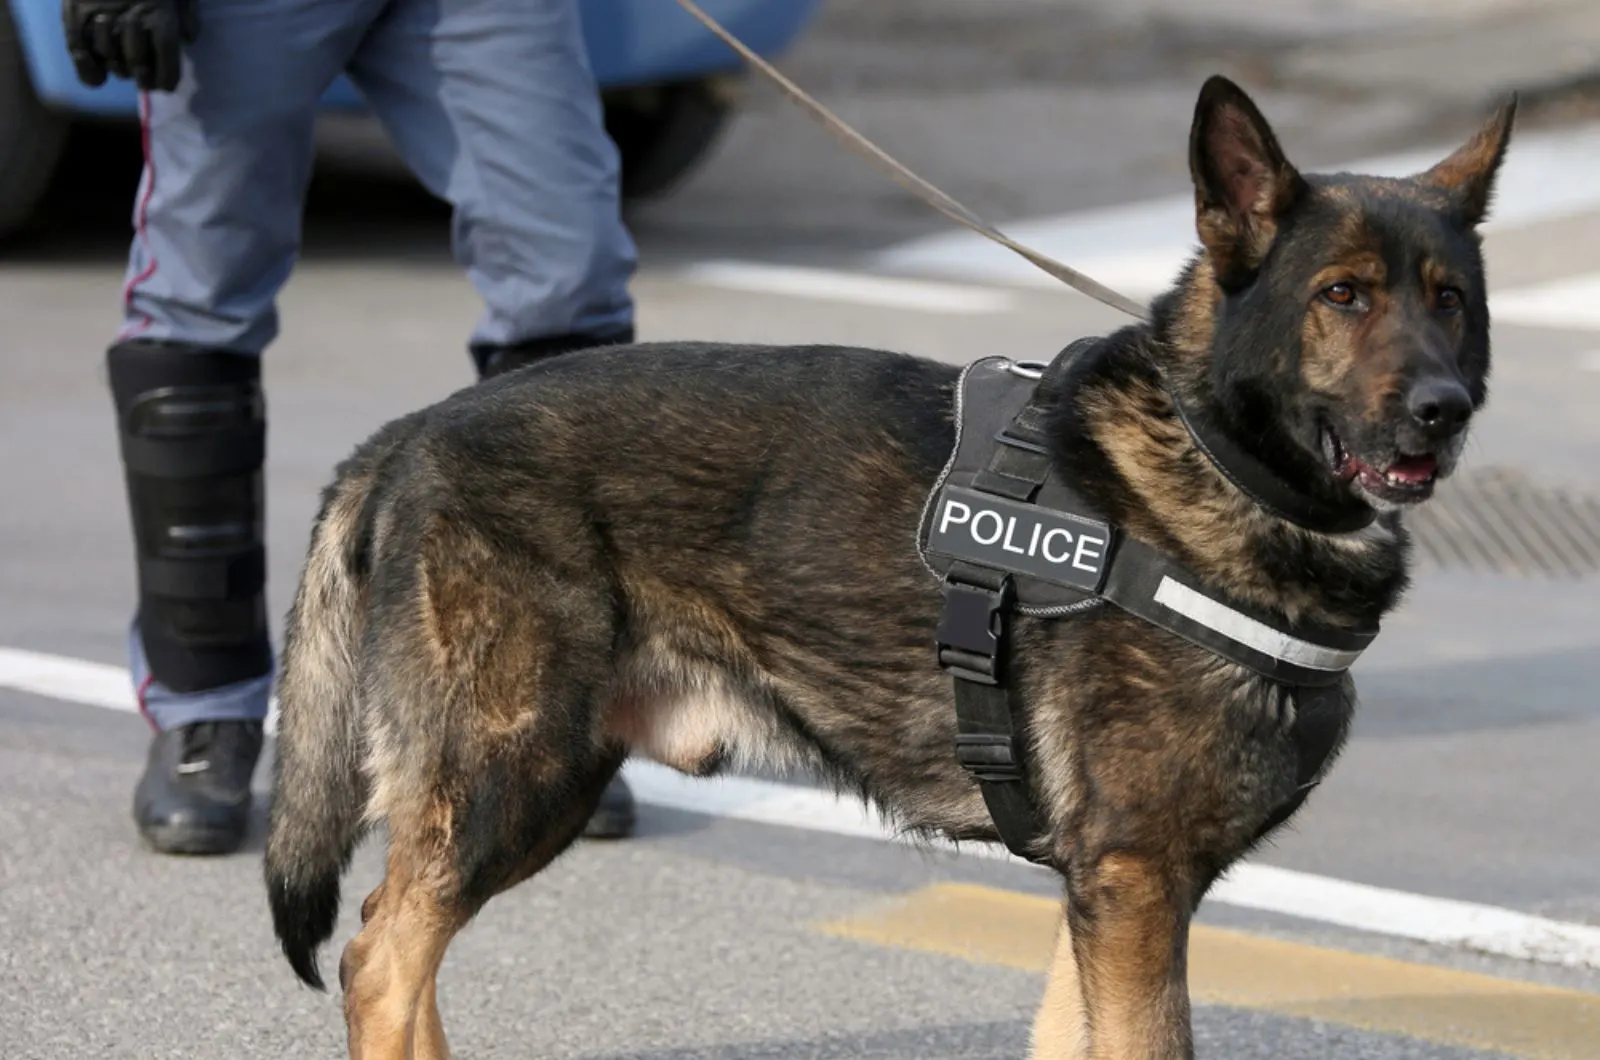 Why Are German Shepherds Good Police Dogs And K-9 Heroes?